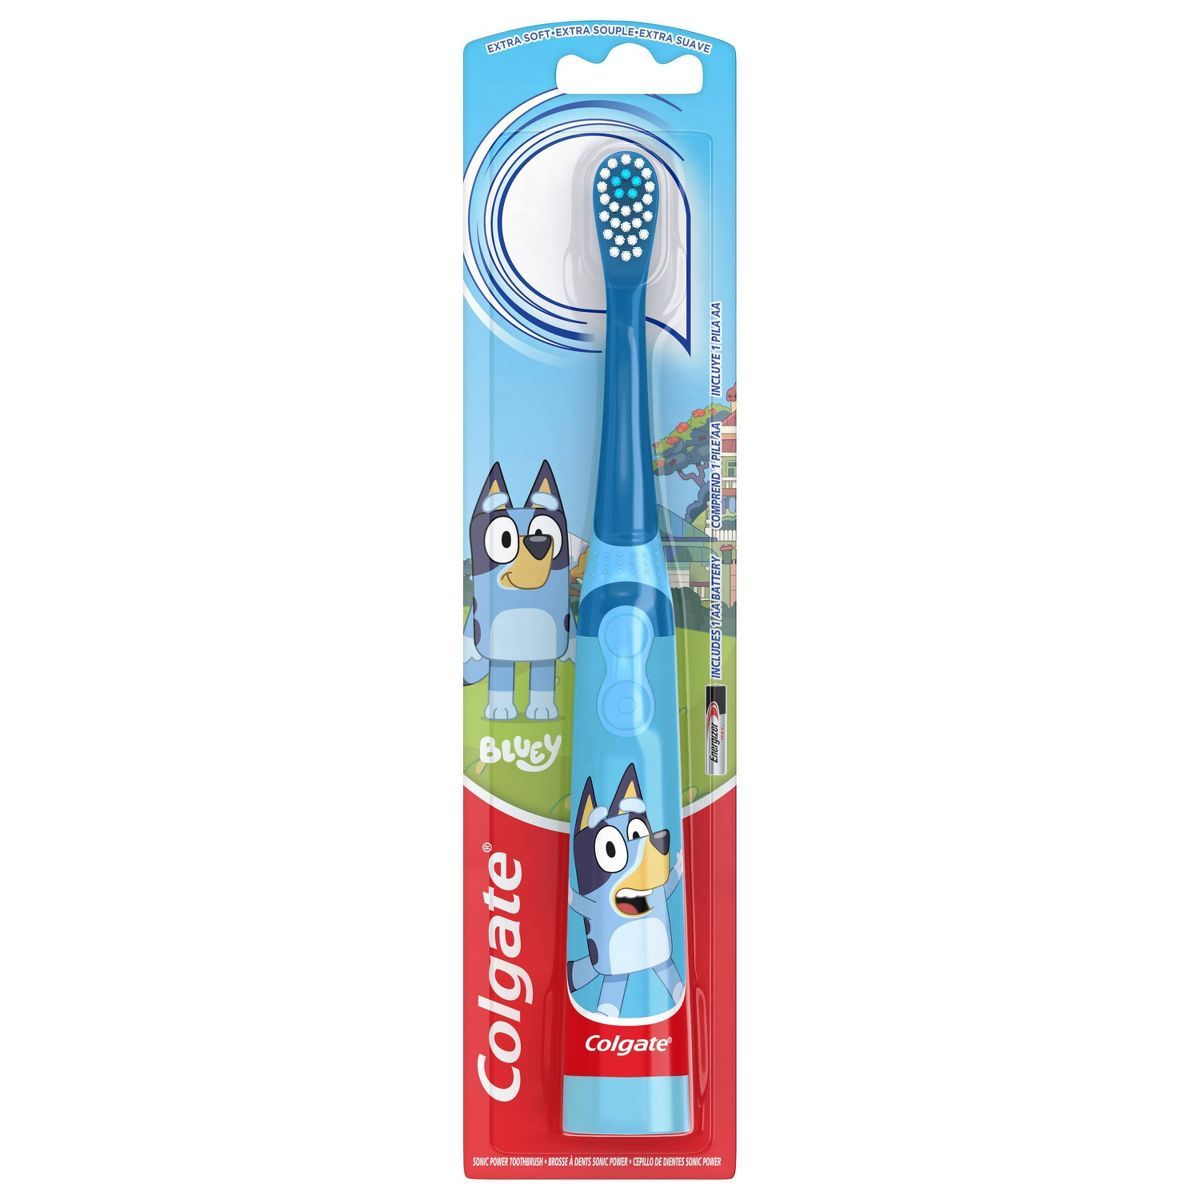 Colgate Kids' Battery Powered Toothbrush - Blue - Trial Size | Target